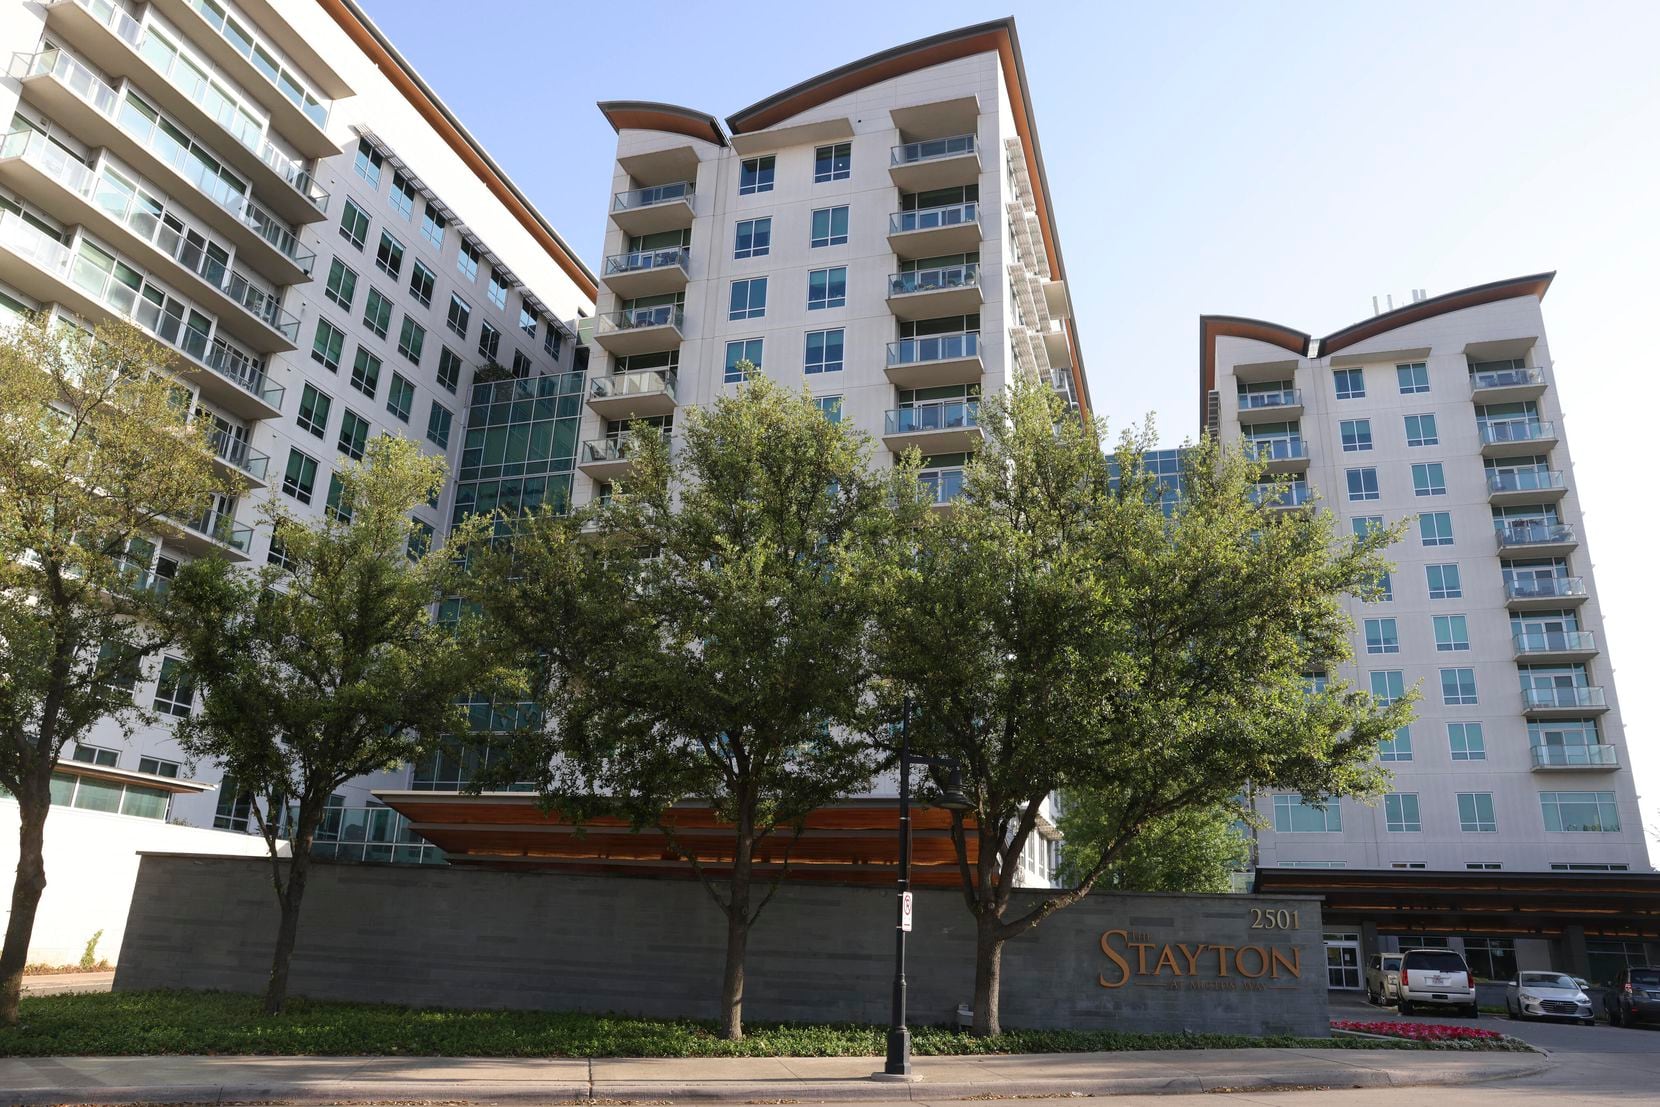 The Stayton at Museum Way in Fort Worth, comprised of three eleven-story towers, filed for...